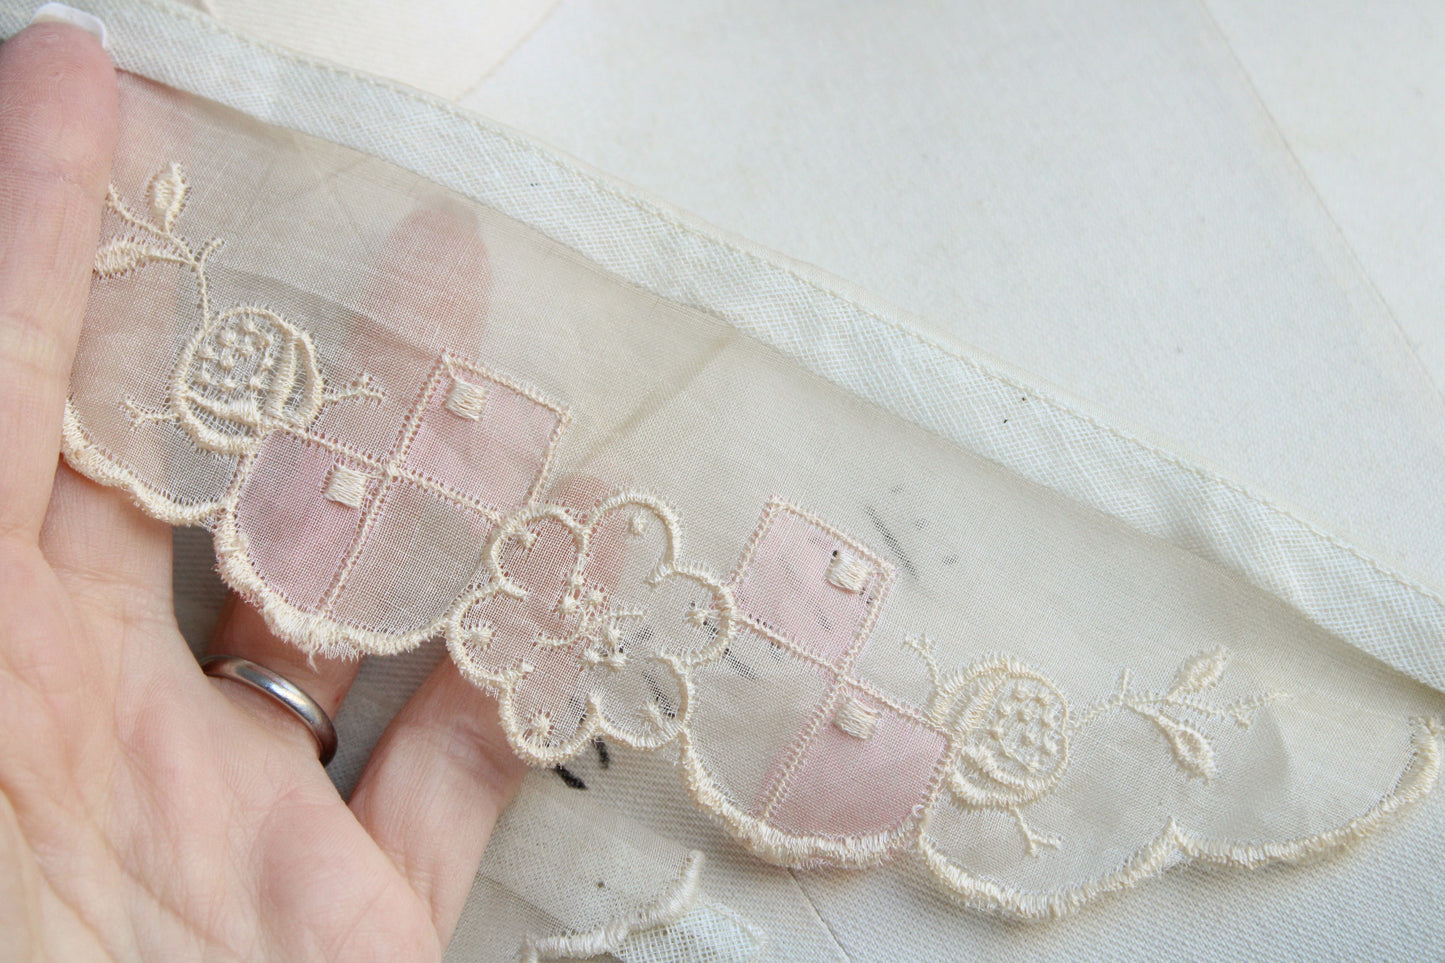 Vintage 1920s 1920s Embroidered Cuffs